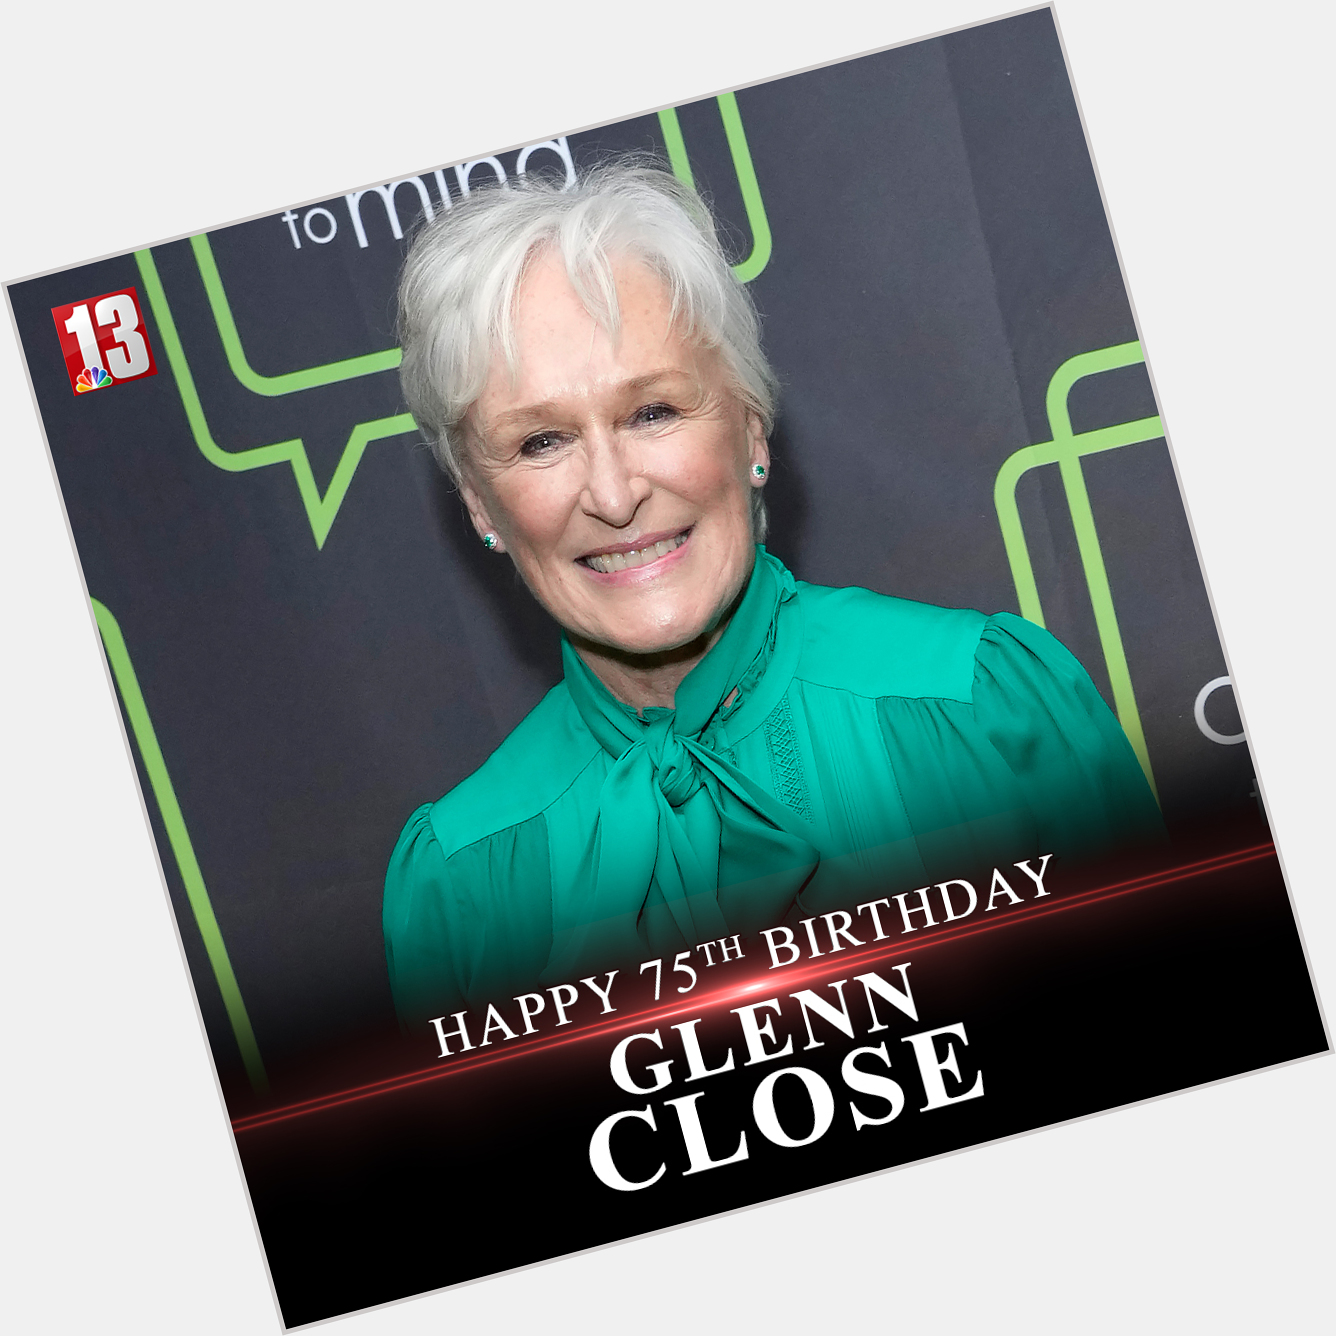   HAPPY BIRTHDAY! Glenn Close is 75 today! What\s your favorite role she\s had? 